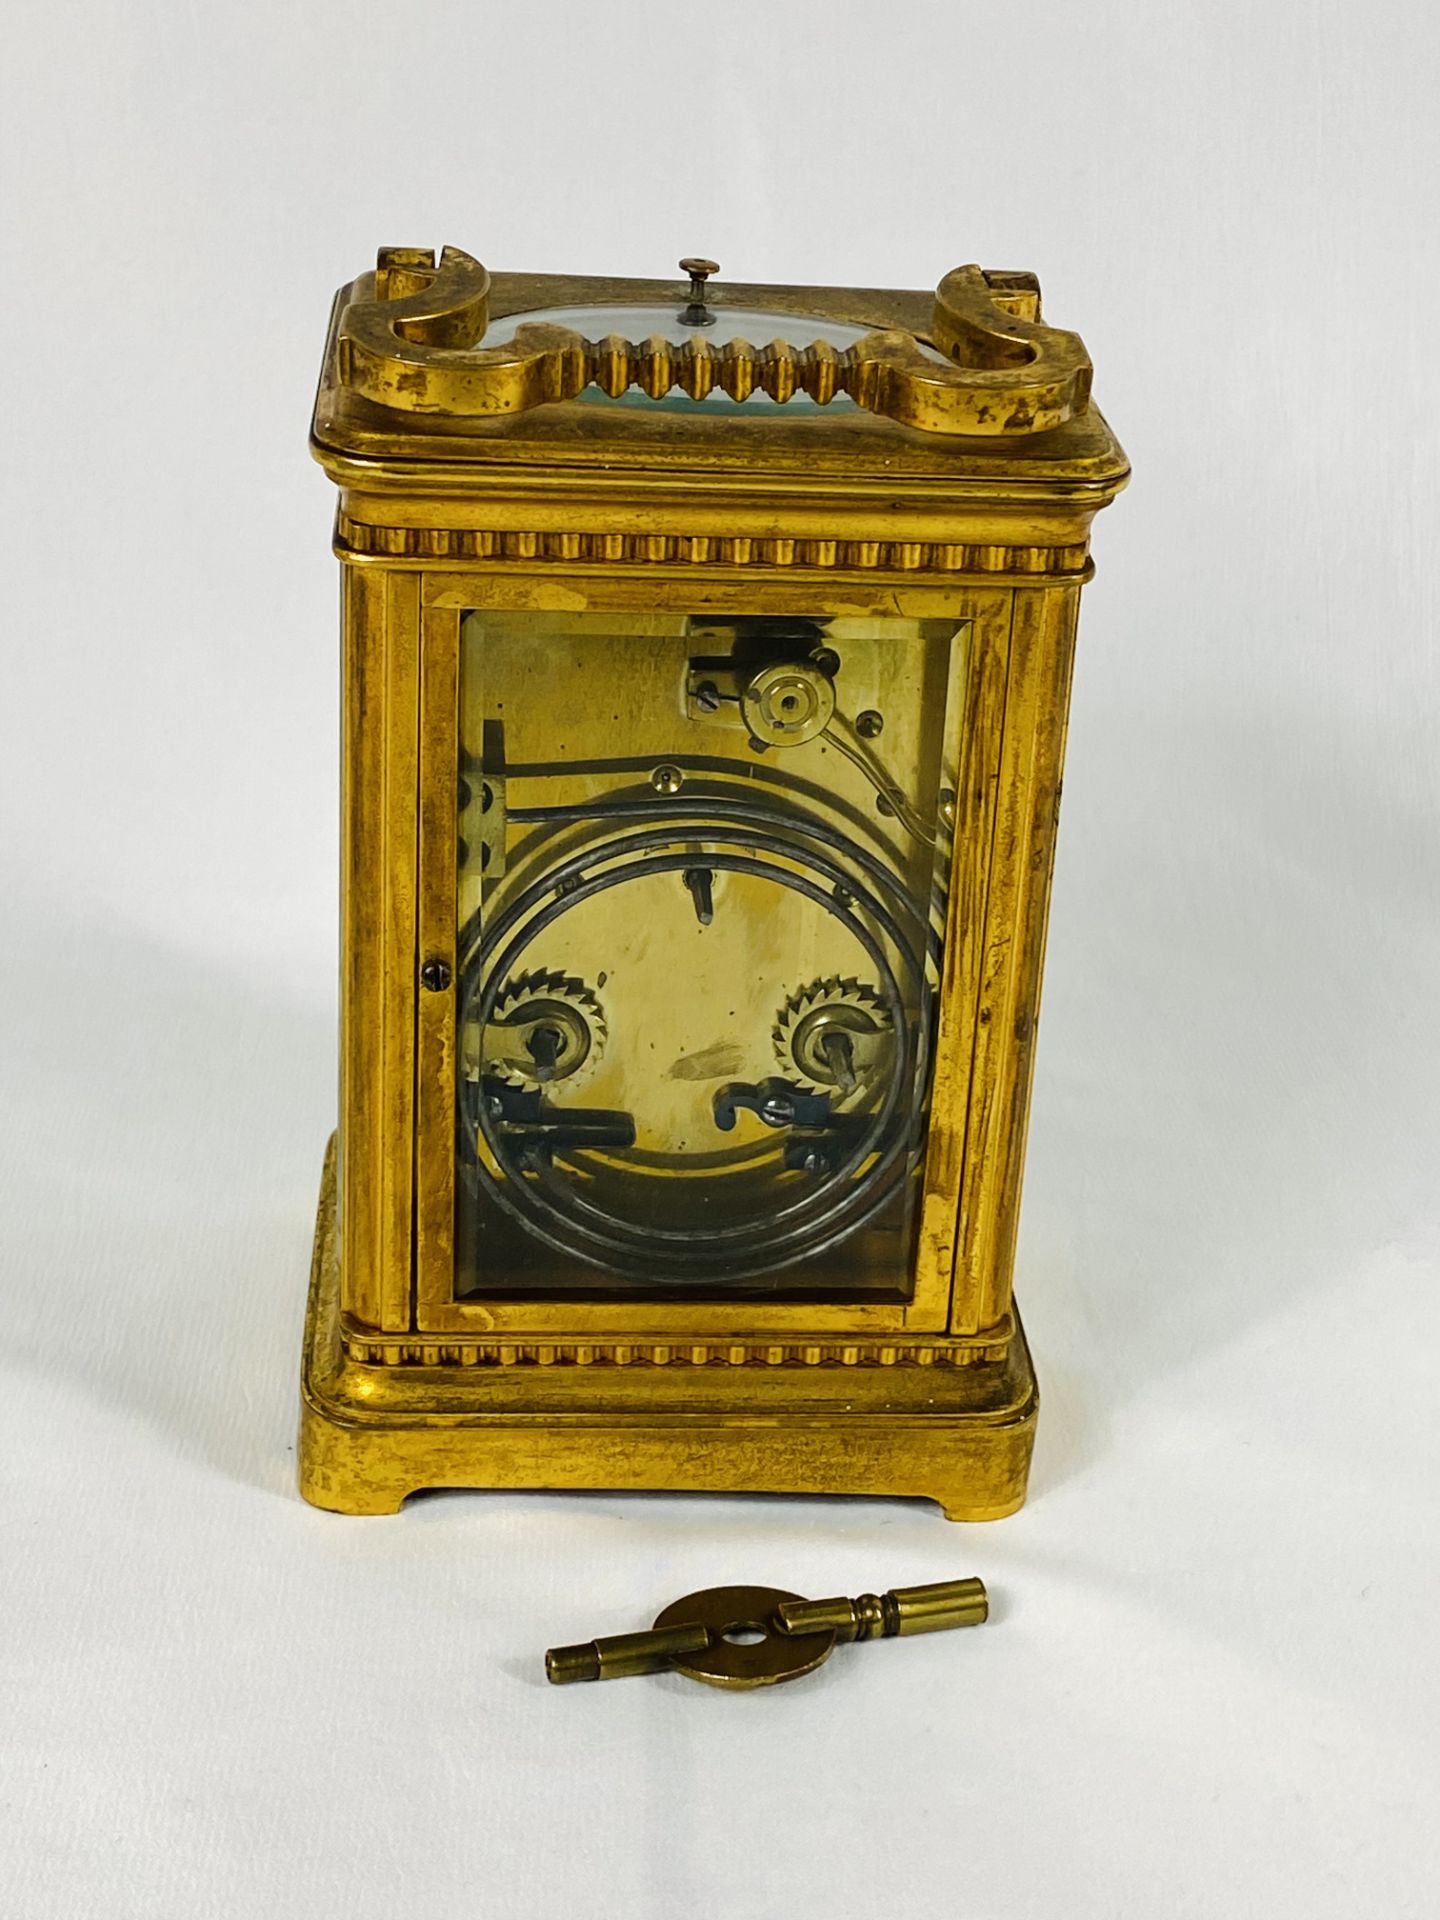 Brass carriage clock - Image 3 of 4